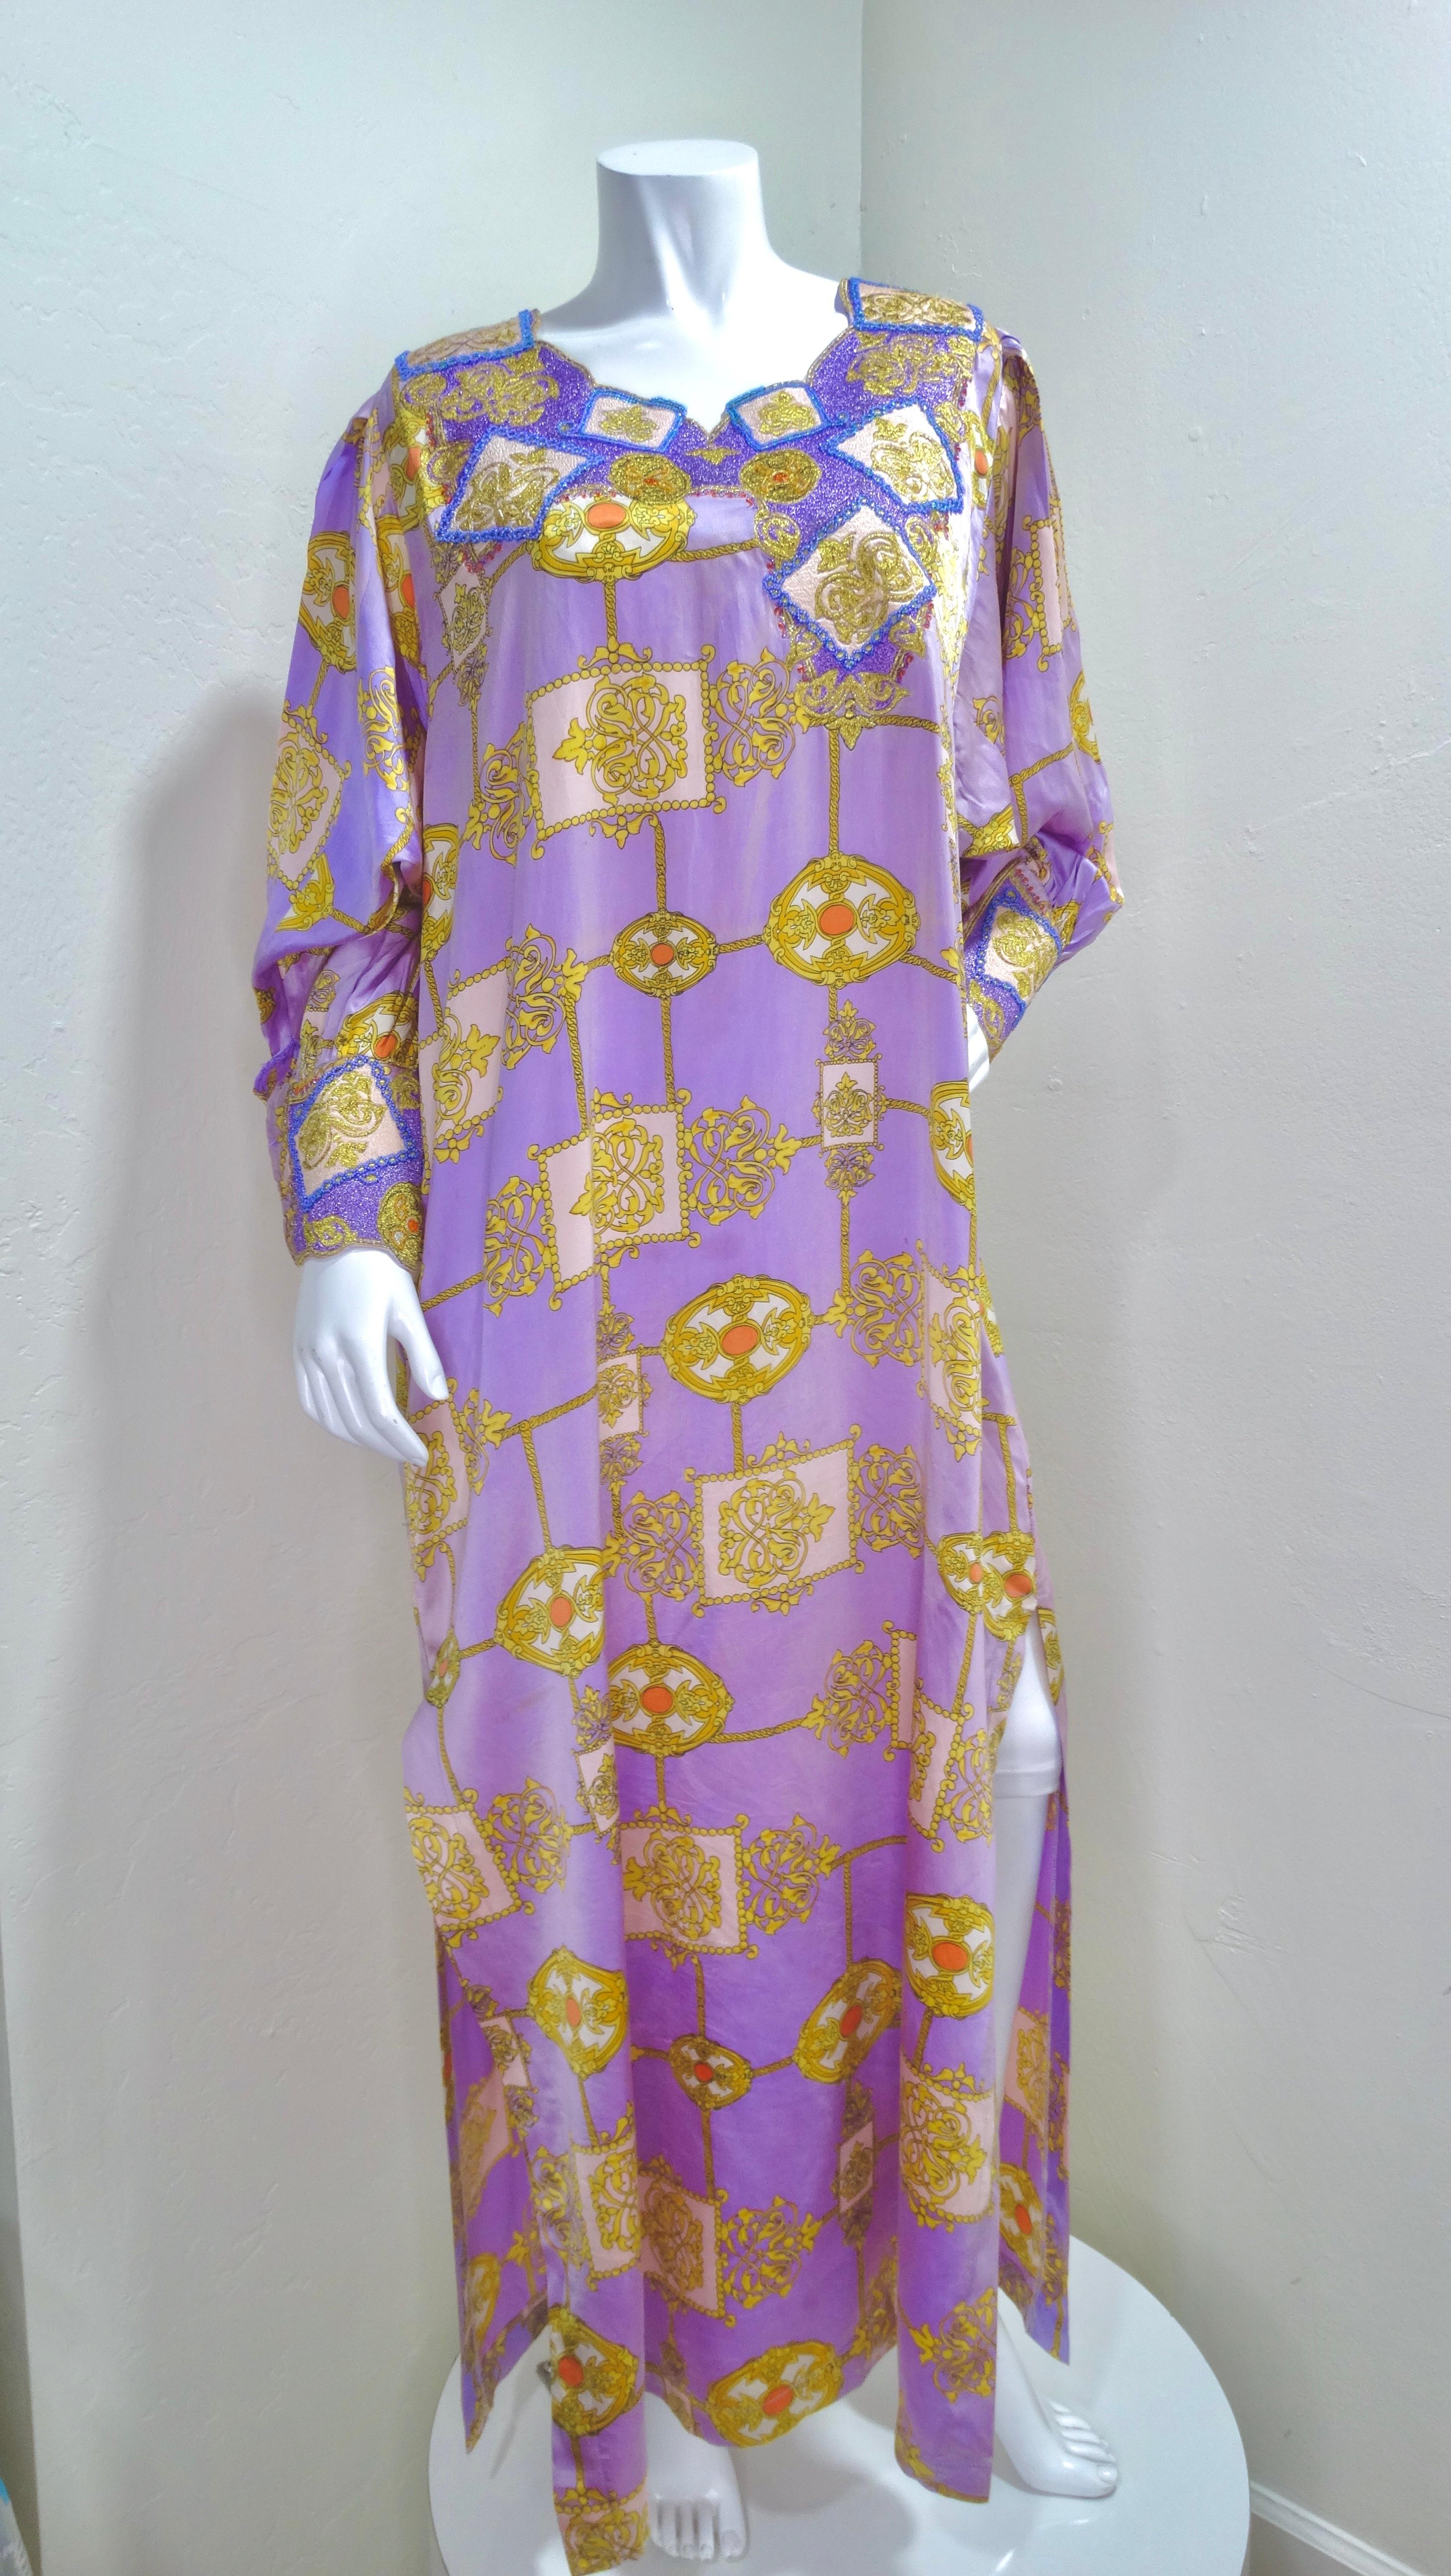 This is a mid-century gem! This Yves Saint Laurent gown has details upon details. The most remarkable being the intricate beaded creating a pattern around the round neckline and the cuffs on the arm. A soft purple is accompanied by a gold frame